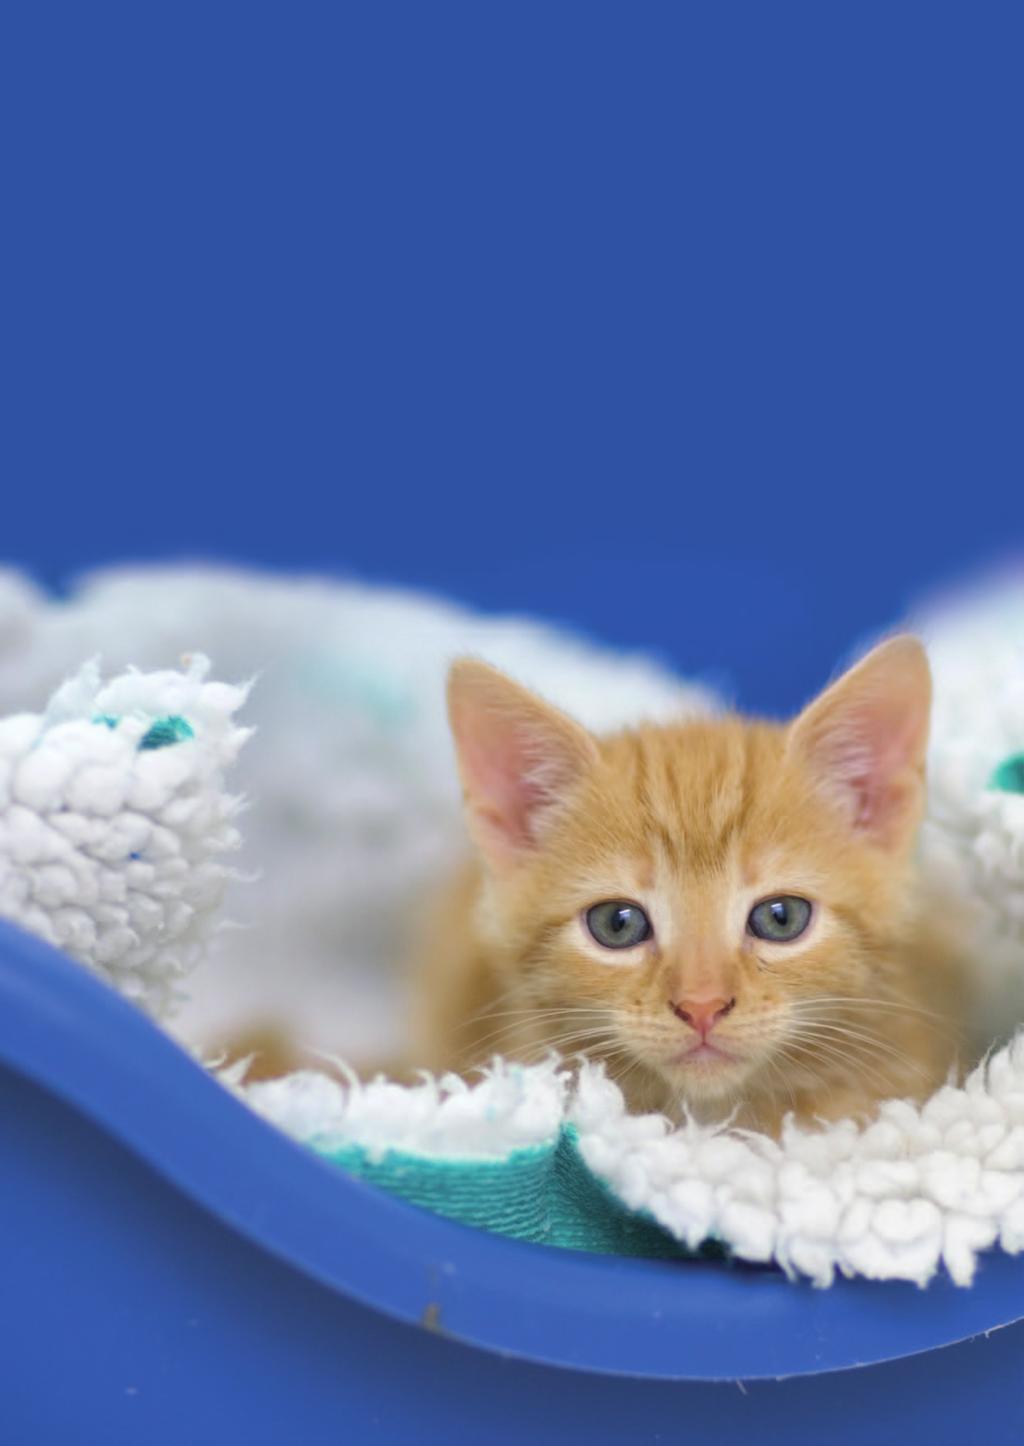 Cat stories with perfect endings! Bumbles was just five weeks old when she was discovered in a plastic bag at Stansted Airport, thought to have been smuggled in from Spain.